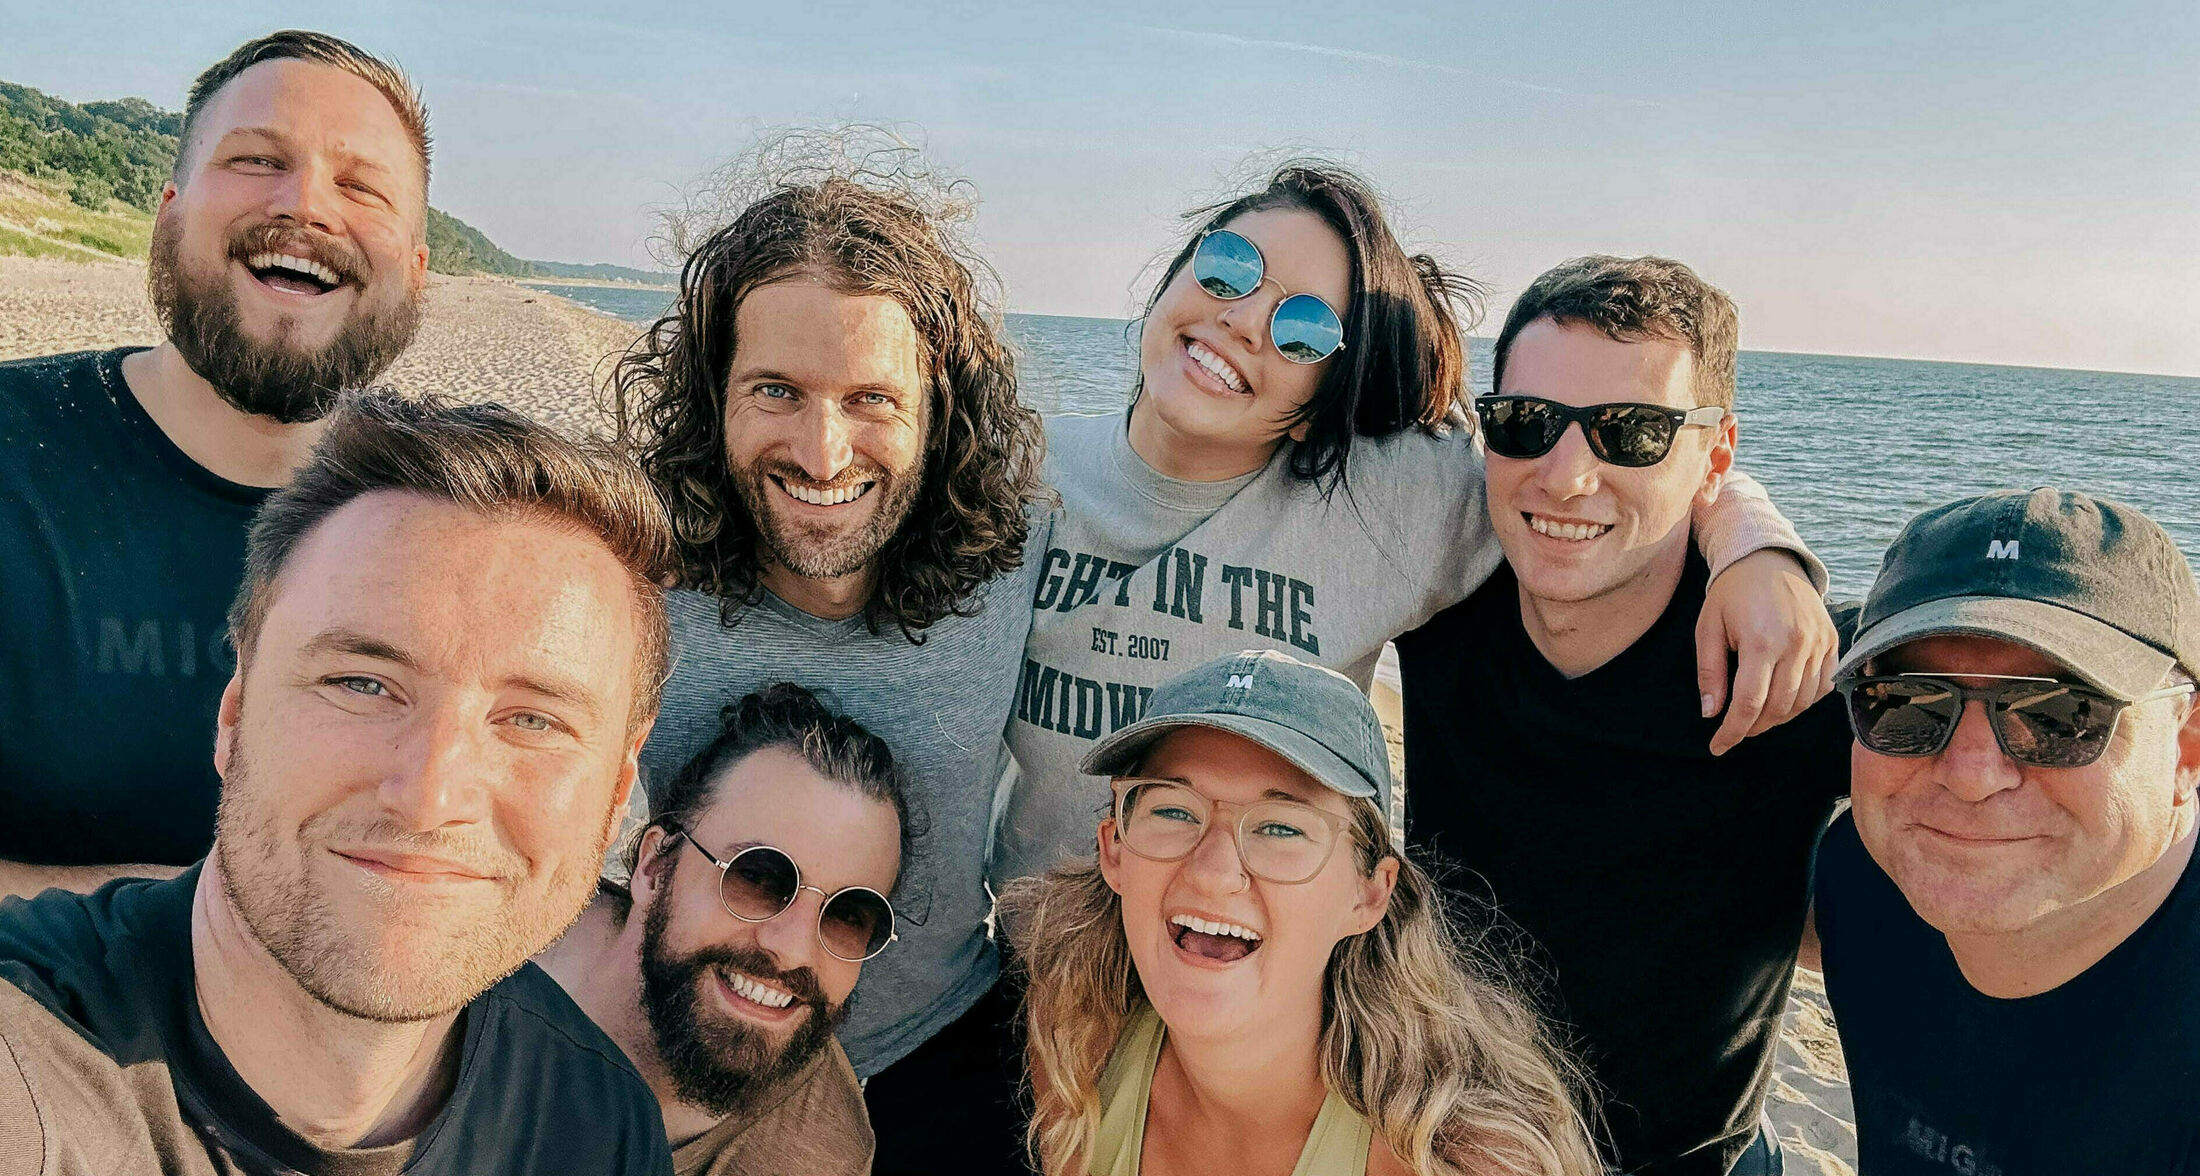 Mighty team members smiling on the beach